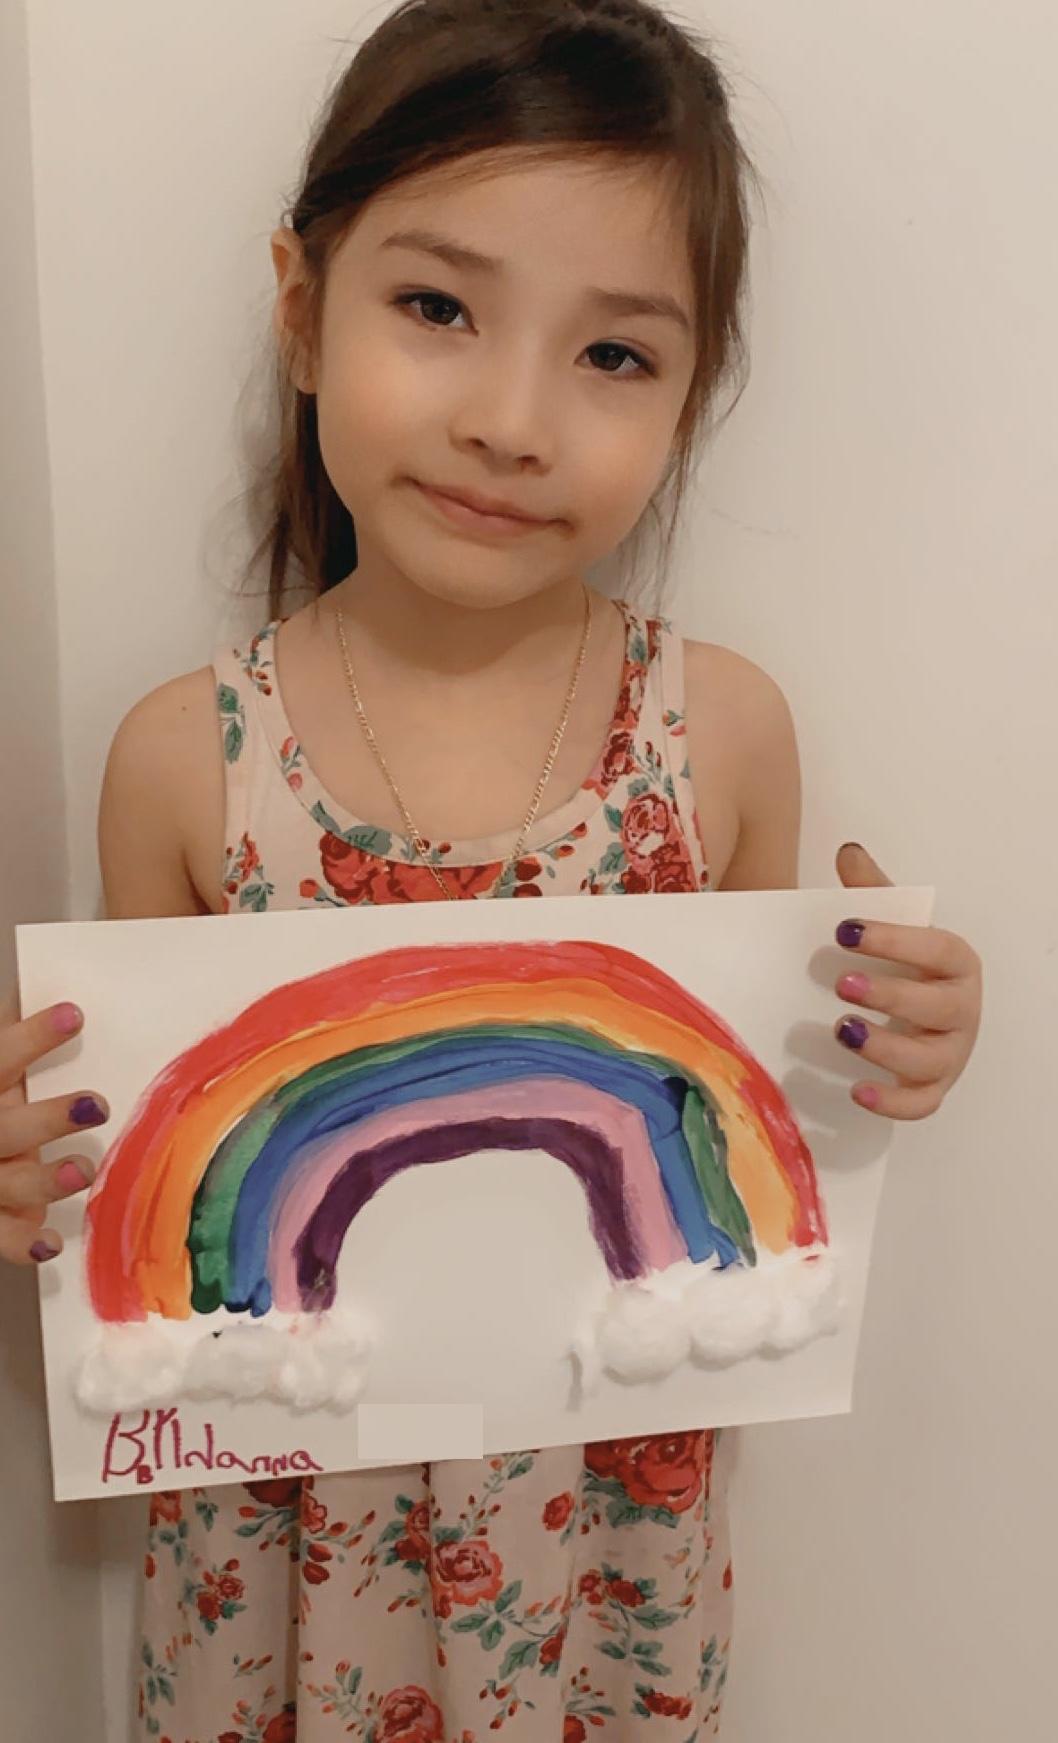 leann holding up her rainbow painting